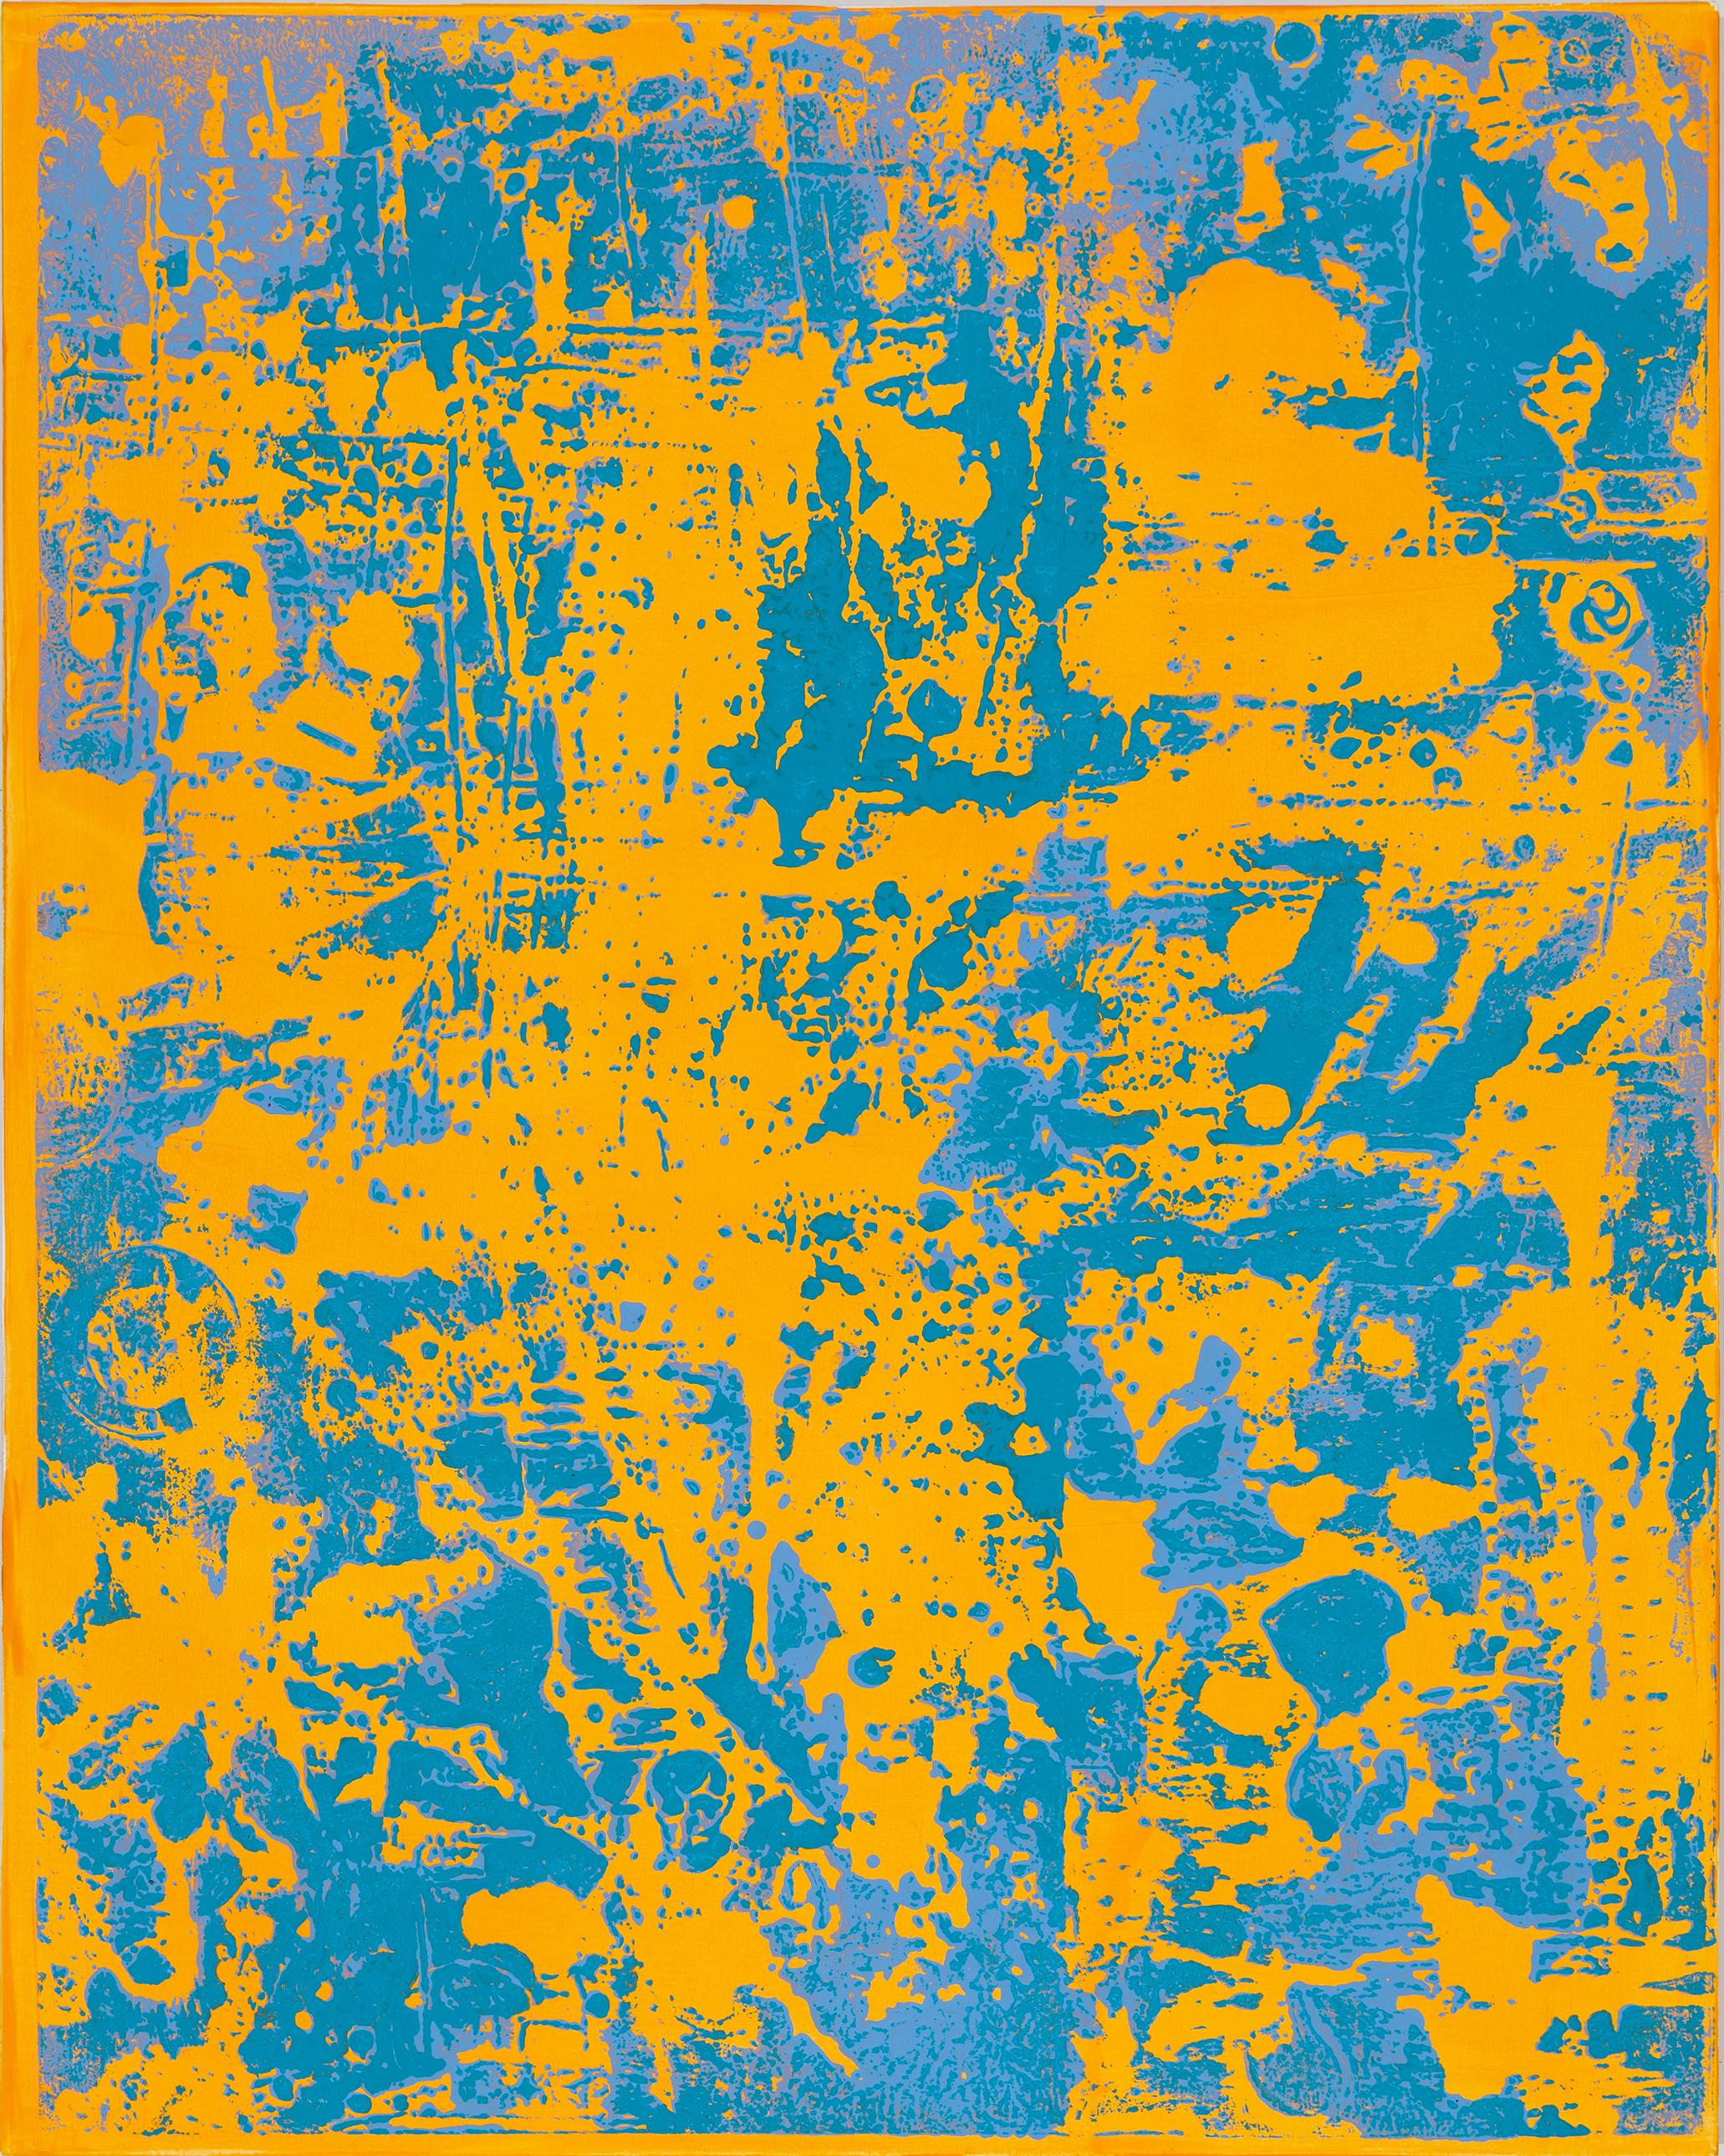 P17-0220 is a large, vertical abstract painting in bright hues of pale yellow orange and vibrant blue by Stephen Maine. This striking painting conveys movement and the suggestion of texture in the application of the acrylic paint on the canvas.